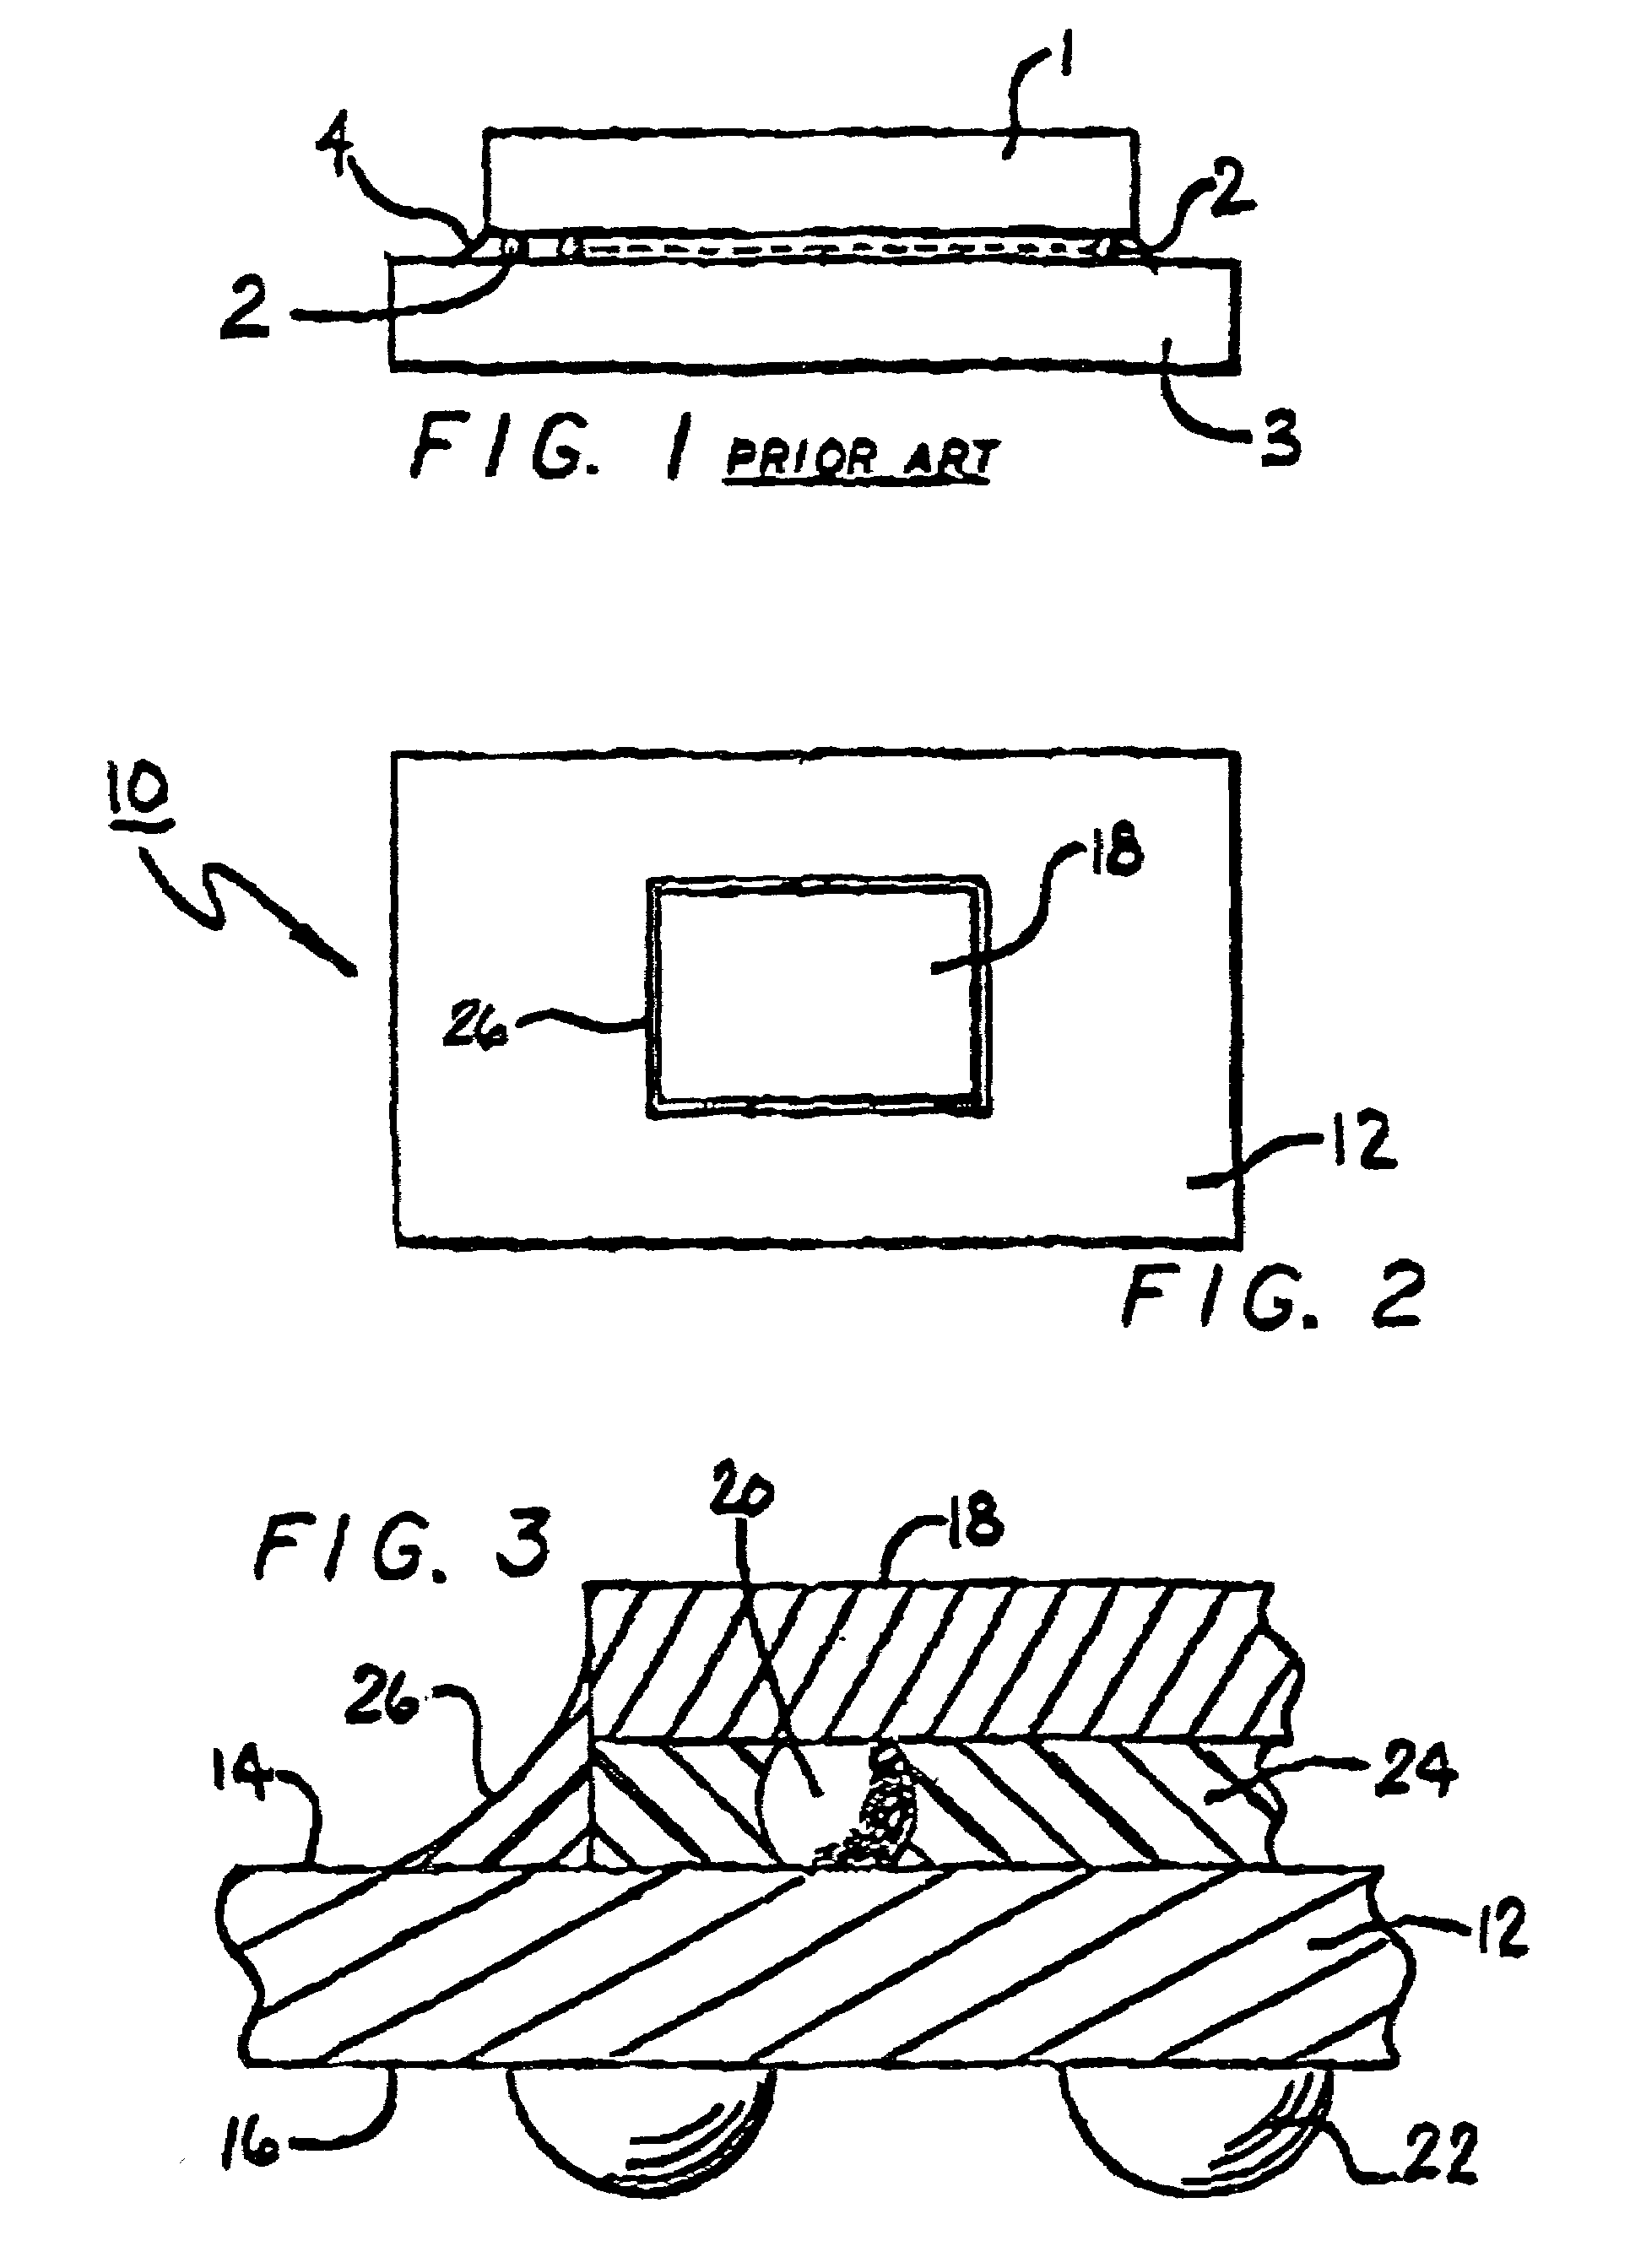 Controlled collapse chip connection (C4) integrated circuit package which has two dissimilar underfill materials